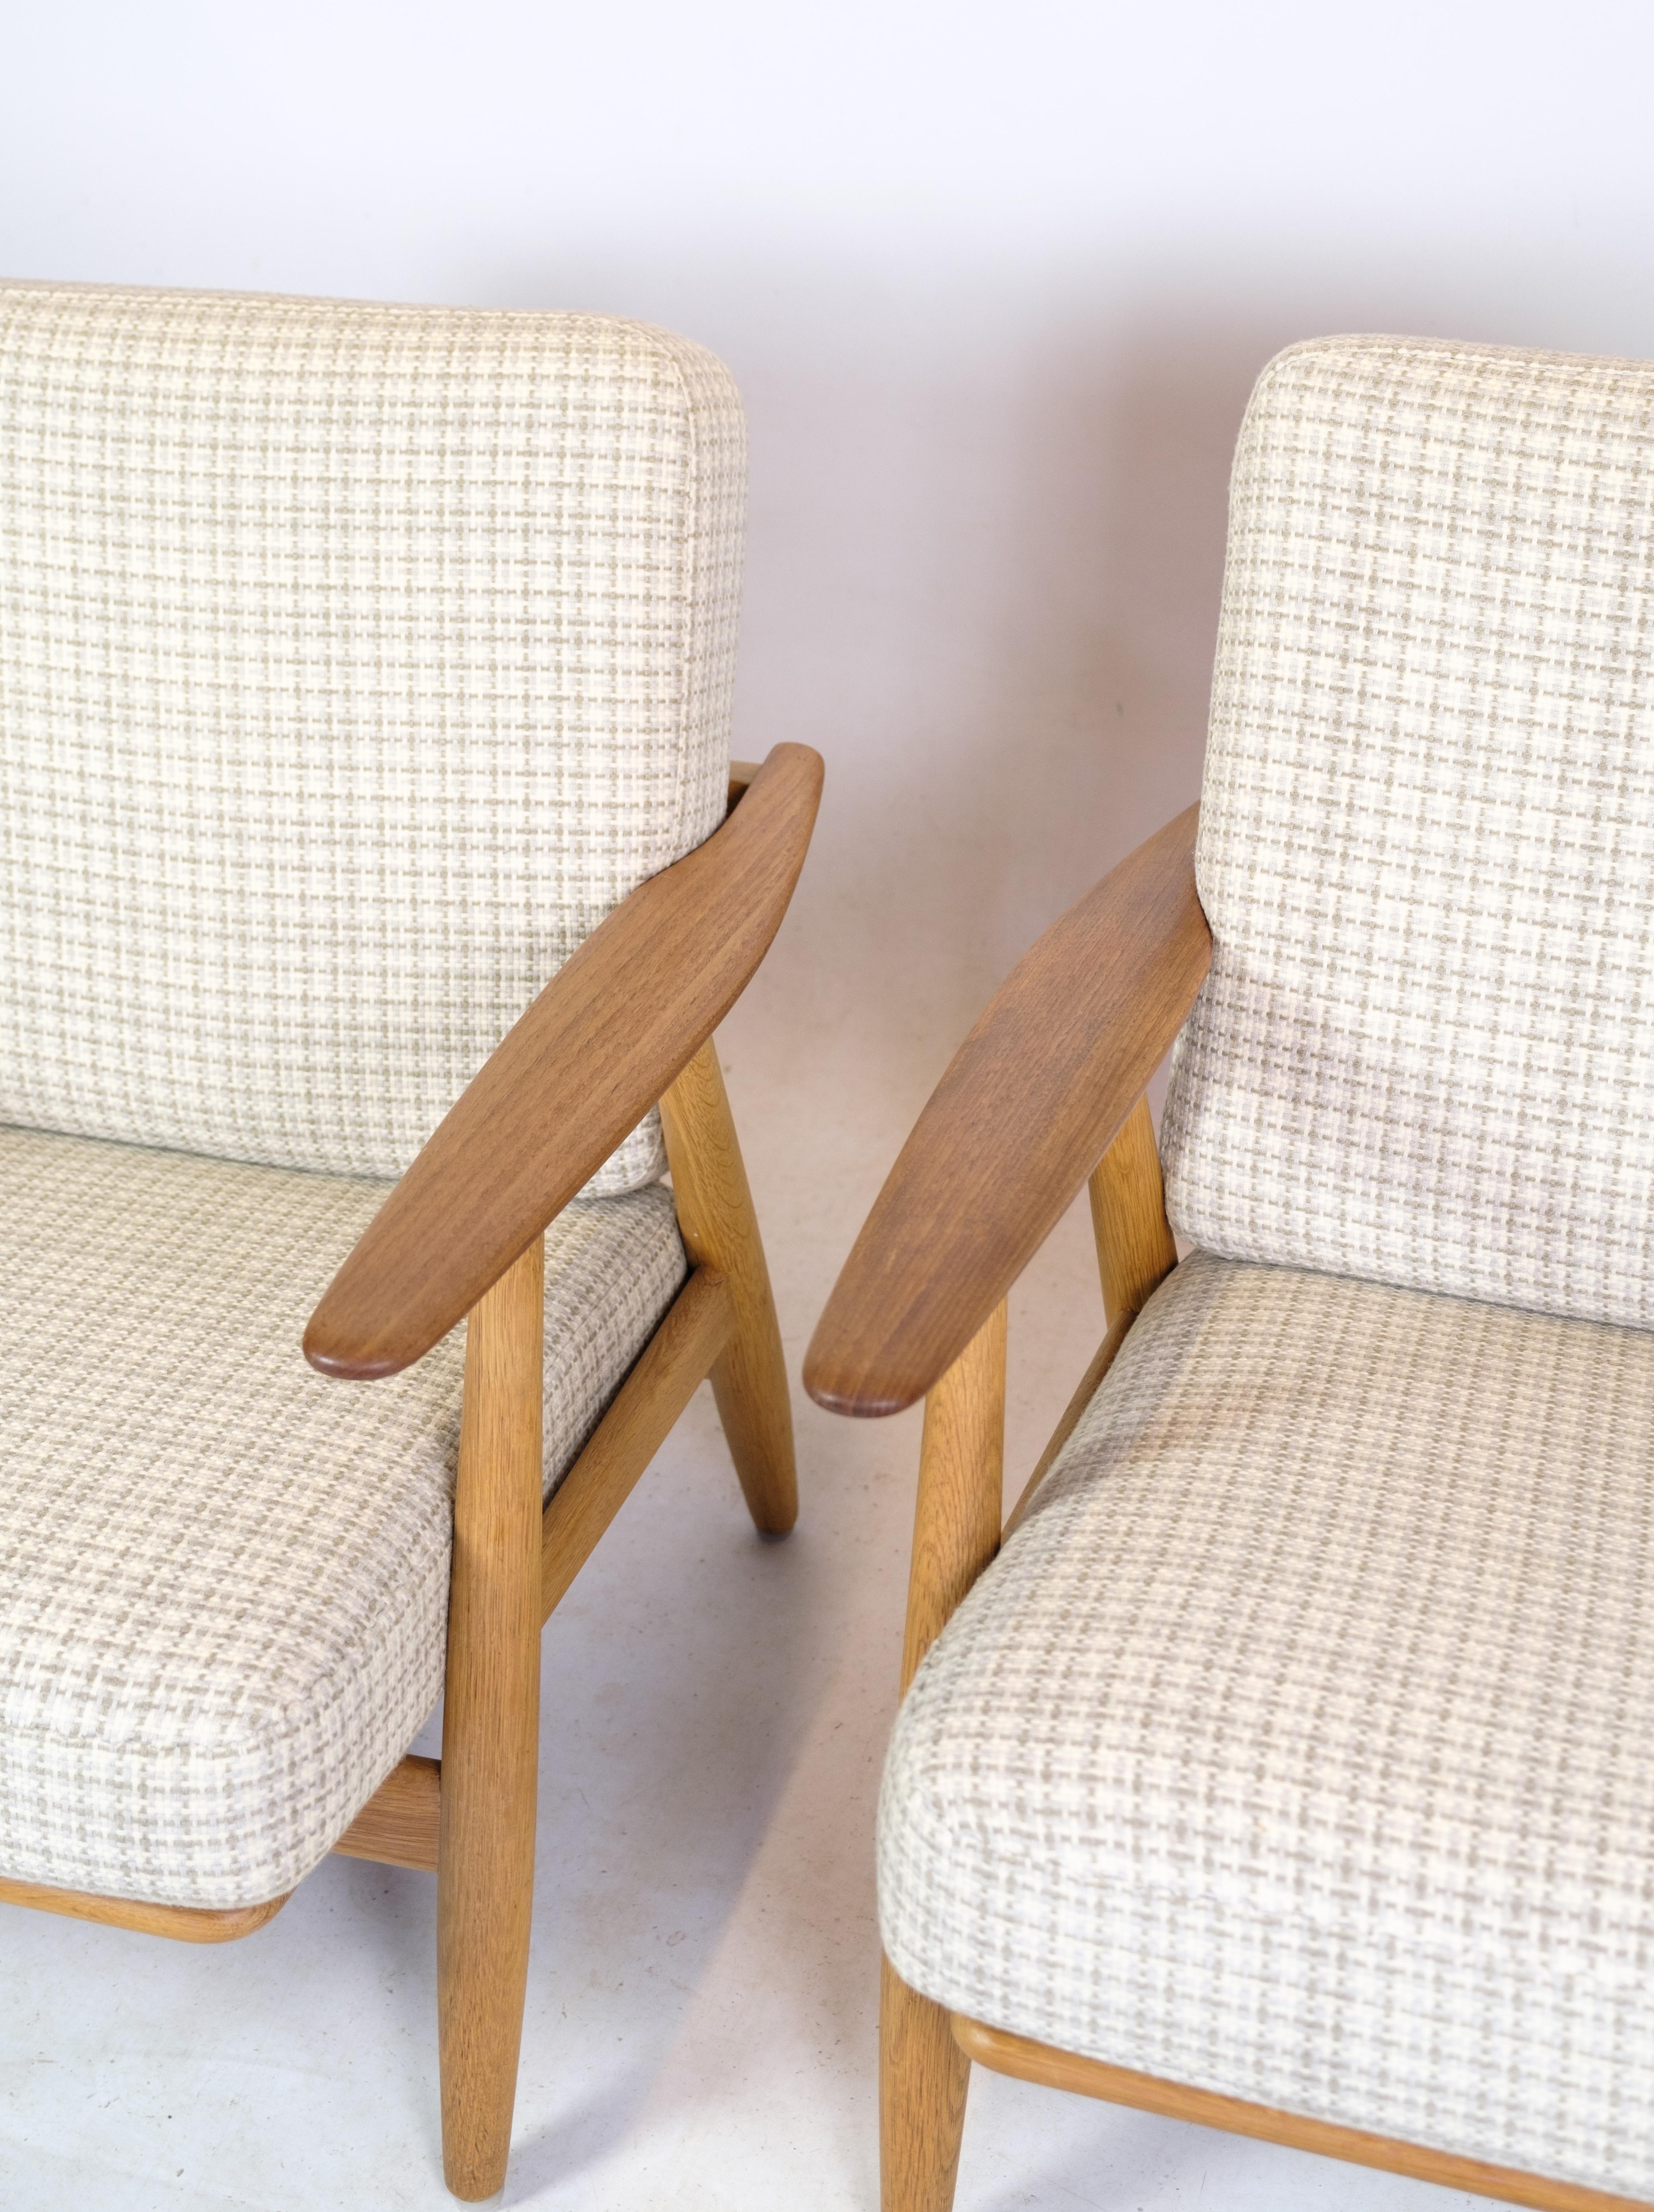 Hans J. Wegner

Pair of GE-240 Cigar chairs, 1955

Produced by Getama in Gedsted, Denmark in the 1950s. These examples of Wegner's iconic lounge chair are made from European oak with their original sprung cushions reupholstered stribed white fabric. 